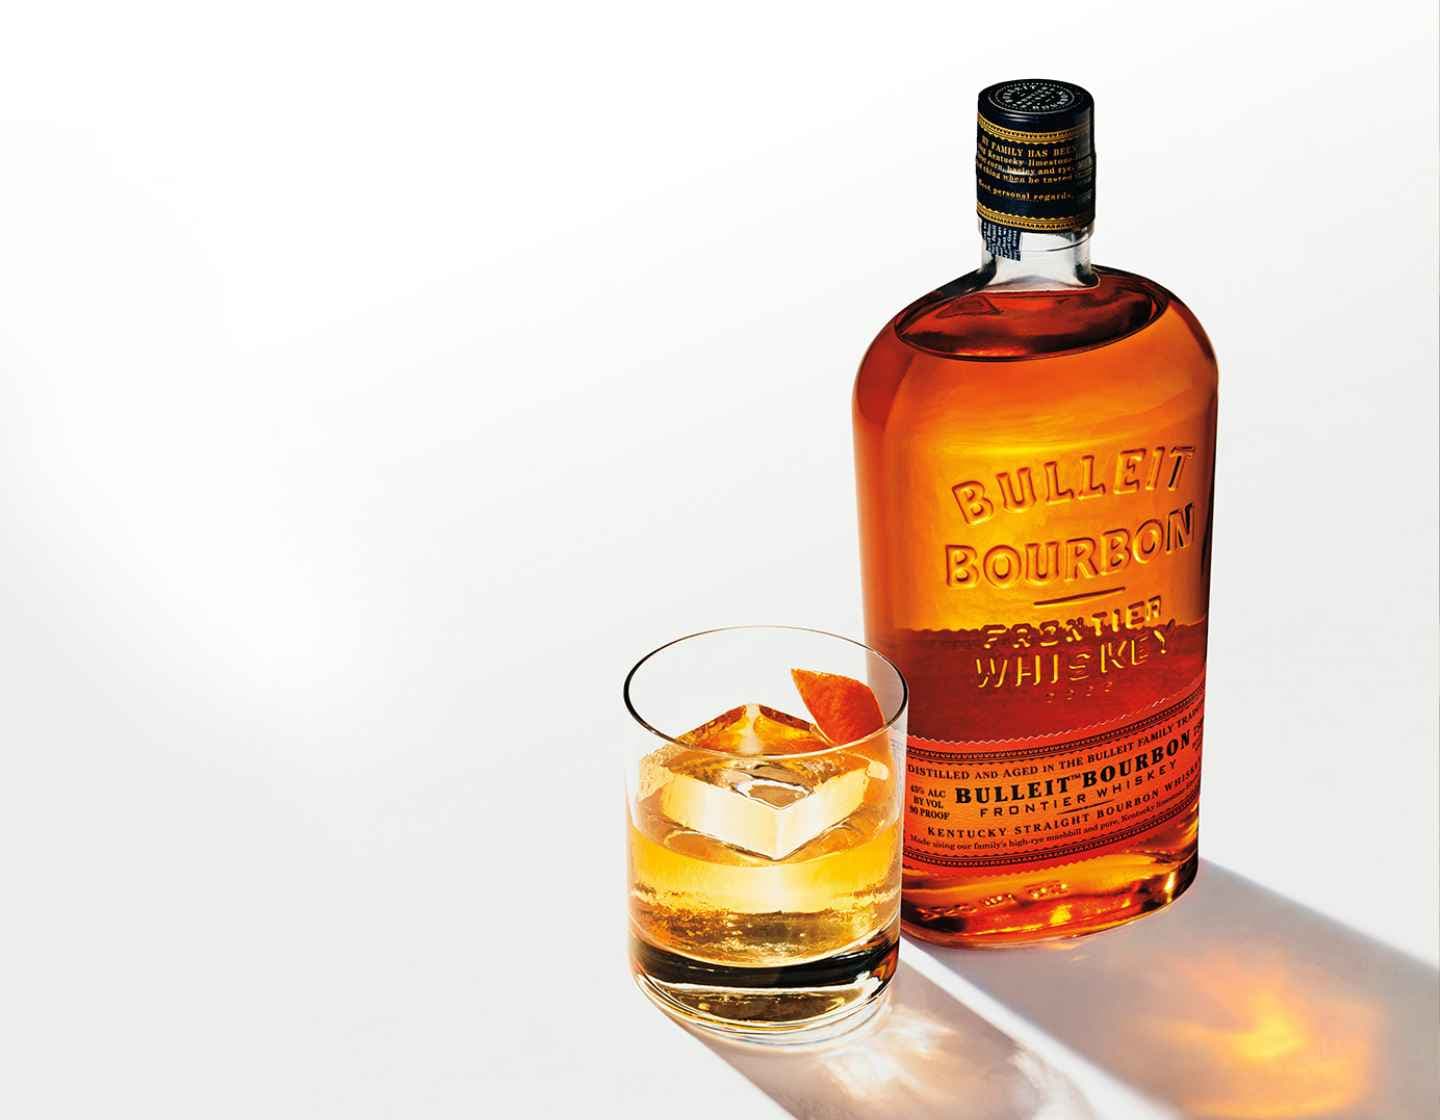 A bottle of Bulleit Bourbon on a white table next to a tumbler glass filled with Bulleit and a large cube of ice. Bright shadows are cast to the bottom right corner.